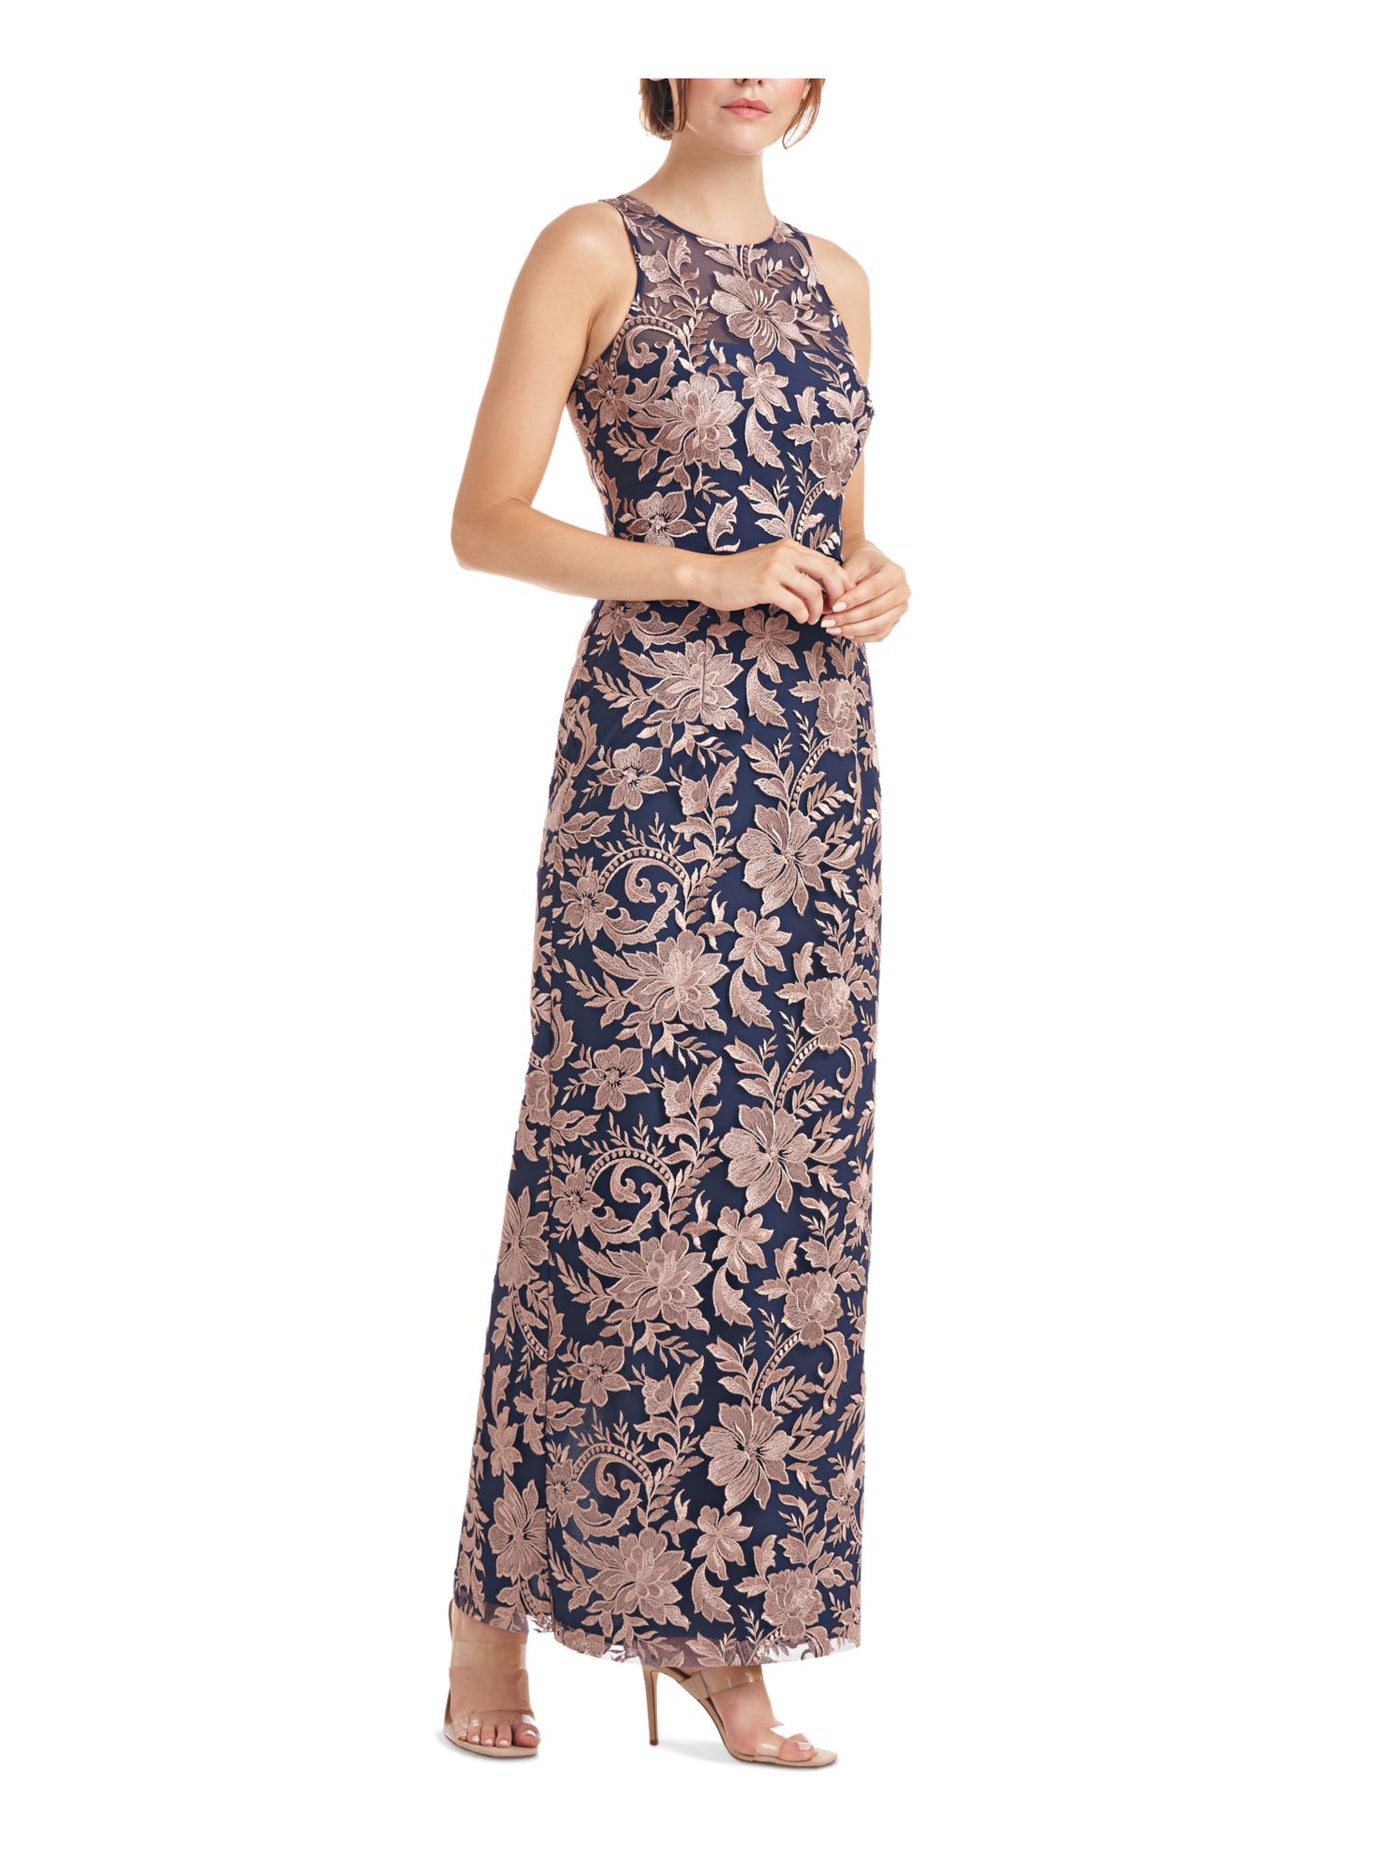 JS COLLECTION Womens Navy Embroidered Zippered Lined Floral Sleeveless Halter Full-Length Party Gown Dress 14